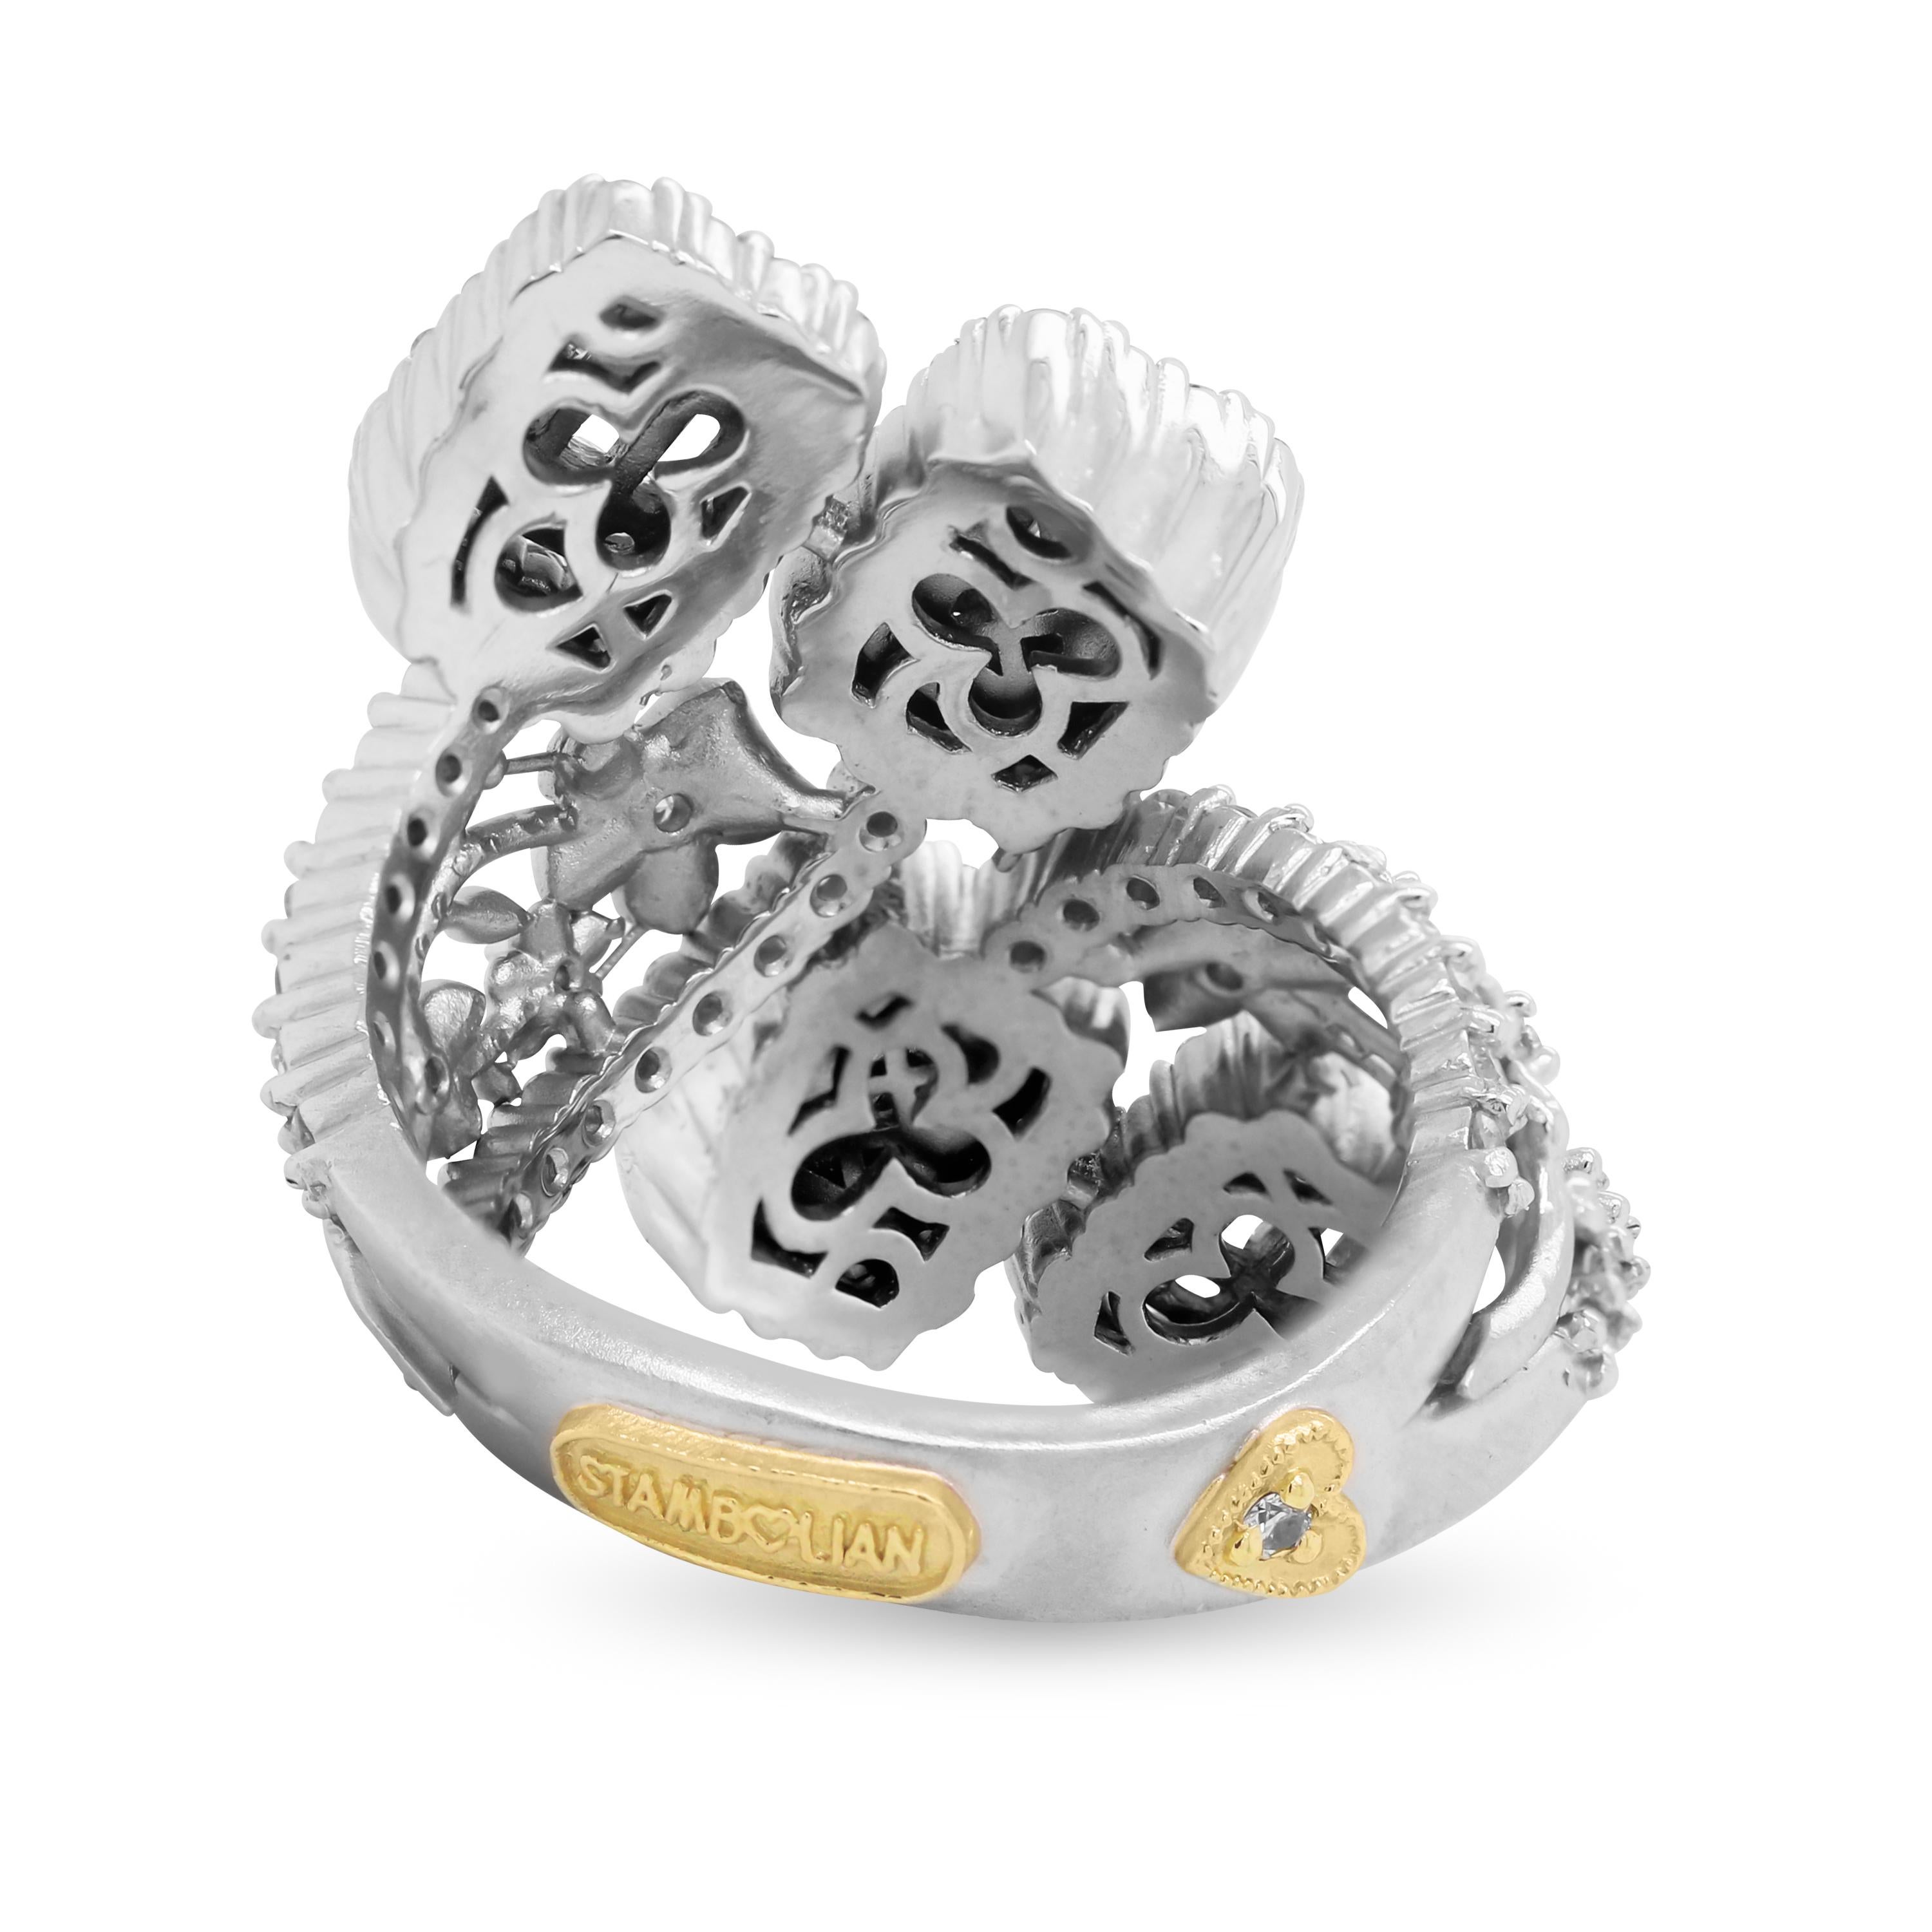 Contemporary Stambolian 18 Karat White Gold Baguette Round Diamond Floral Bypass Flower Ring